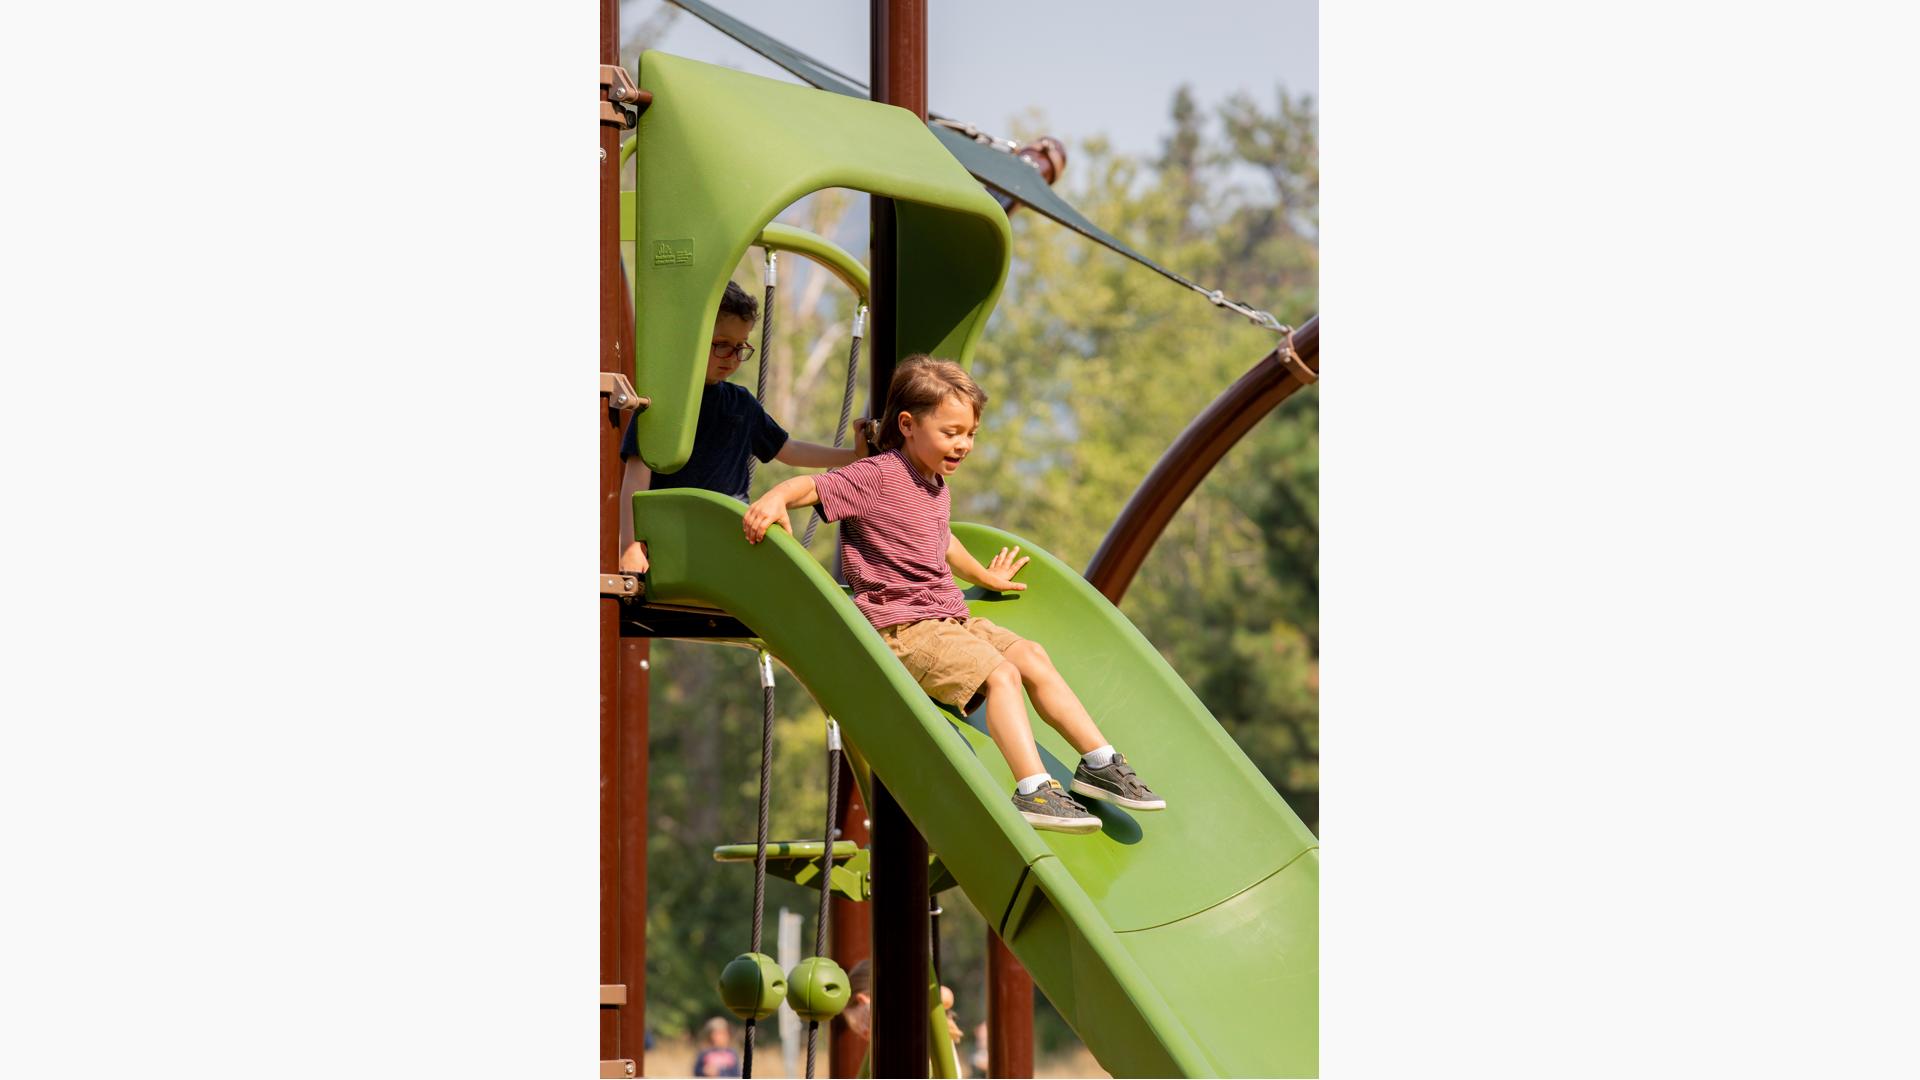 Boy riding down Play Booster slide